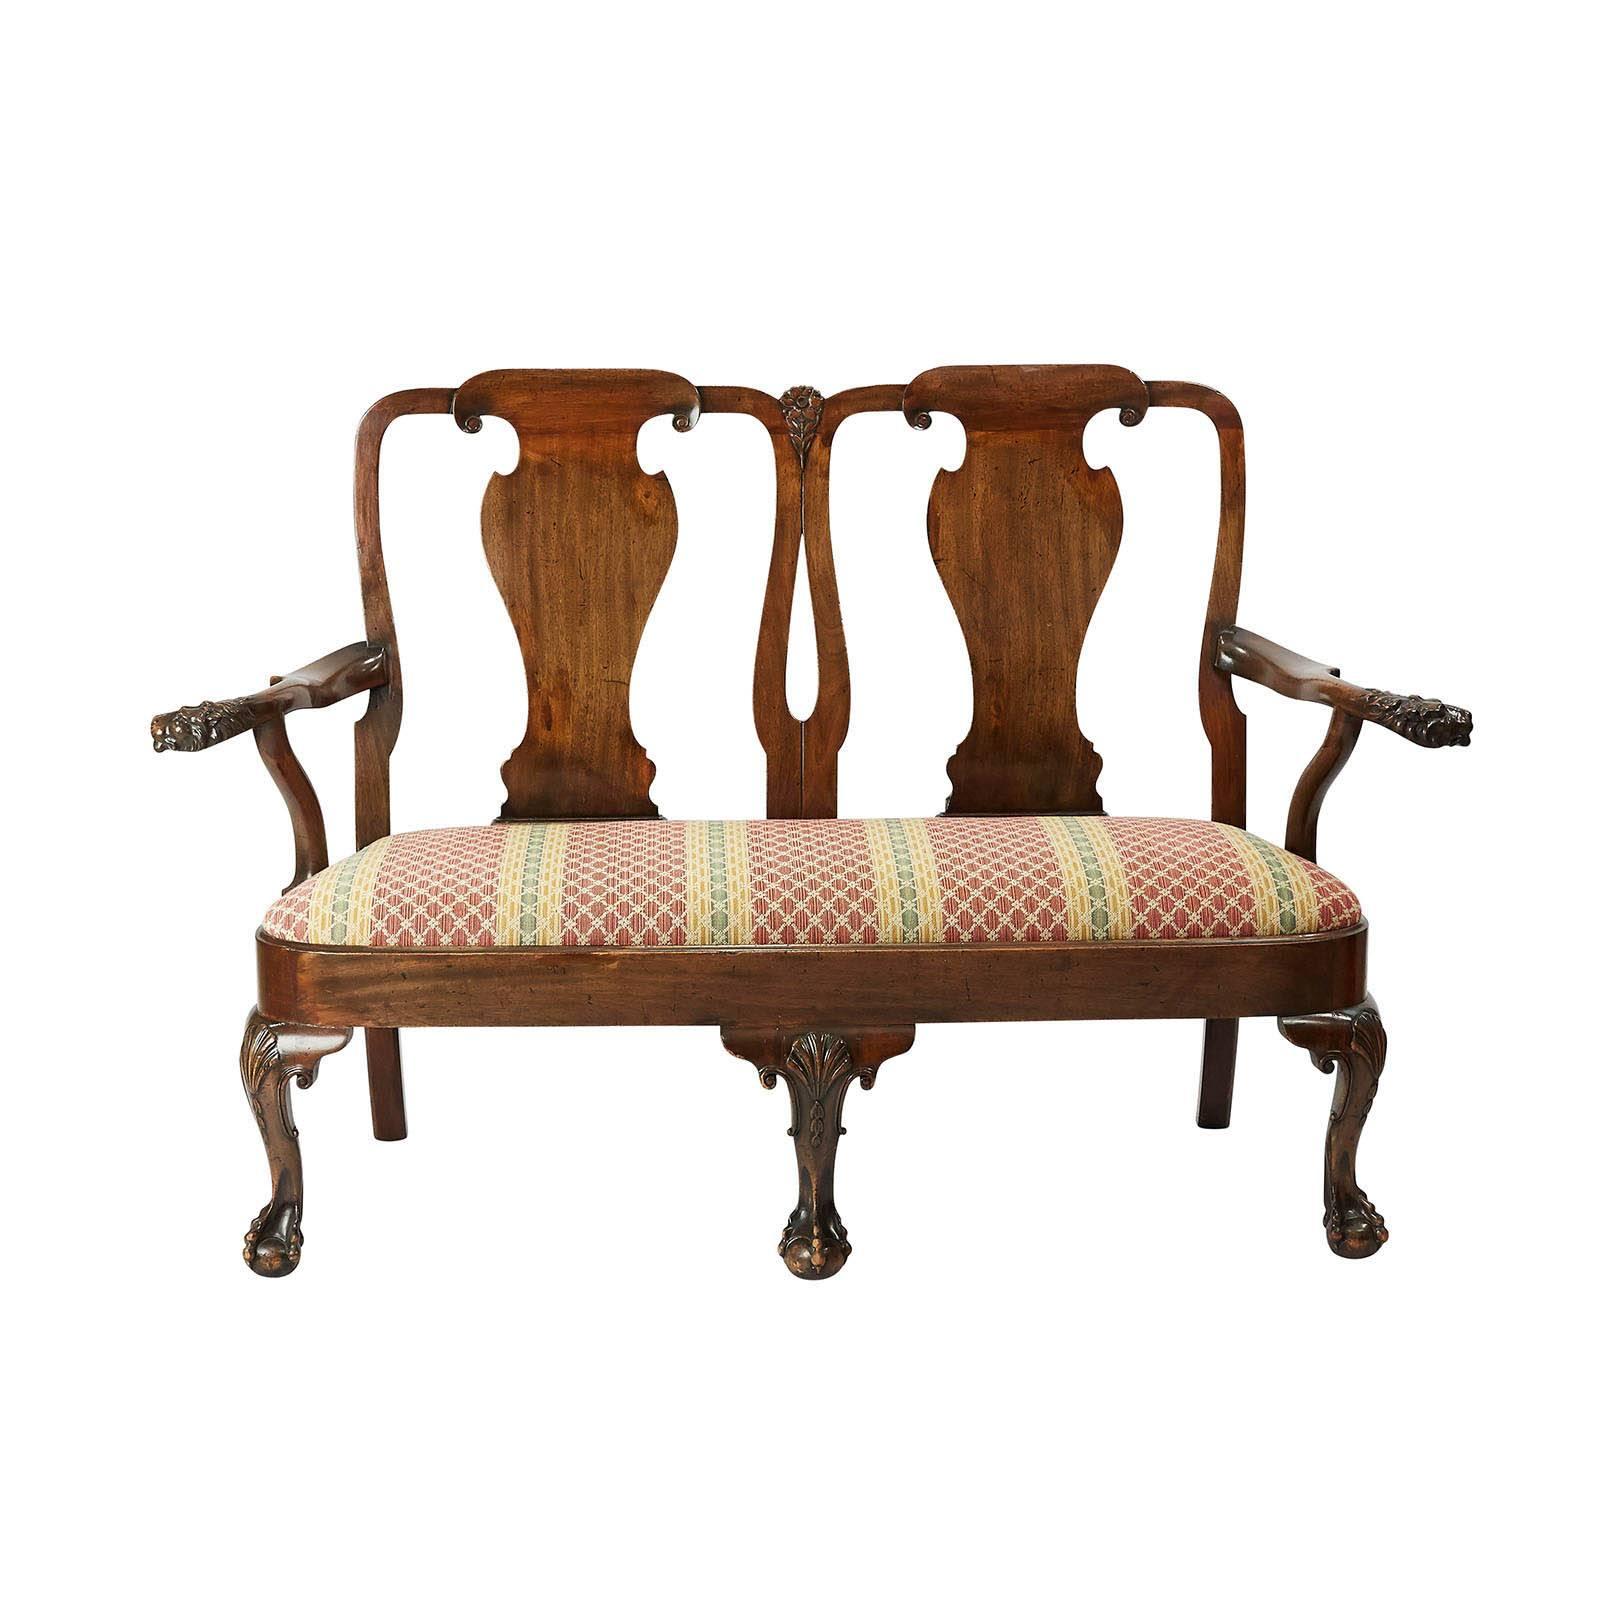 An exceptional Irish George II style settee with ball and claw feet and shell carved knees. The arms sweep out ending in lions heads, good color and patina, Ireland, circa 1890.

 